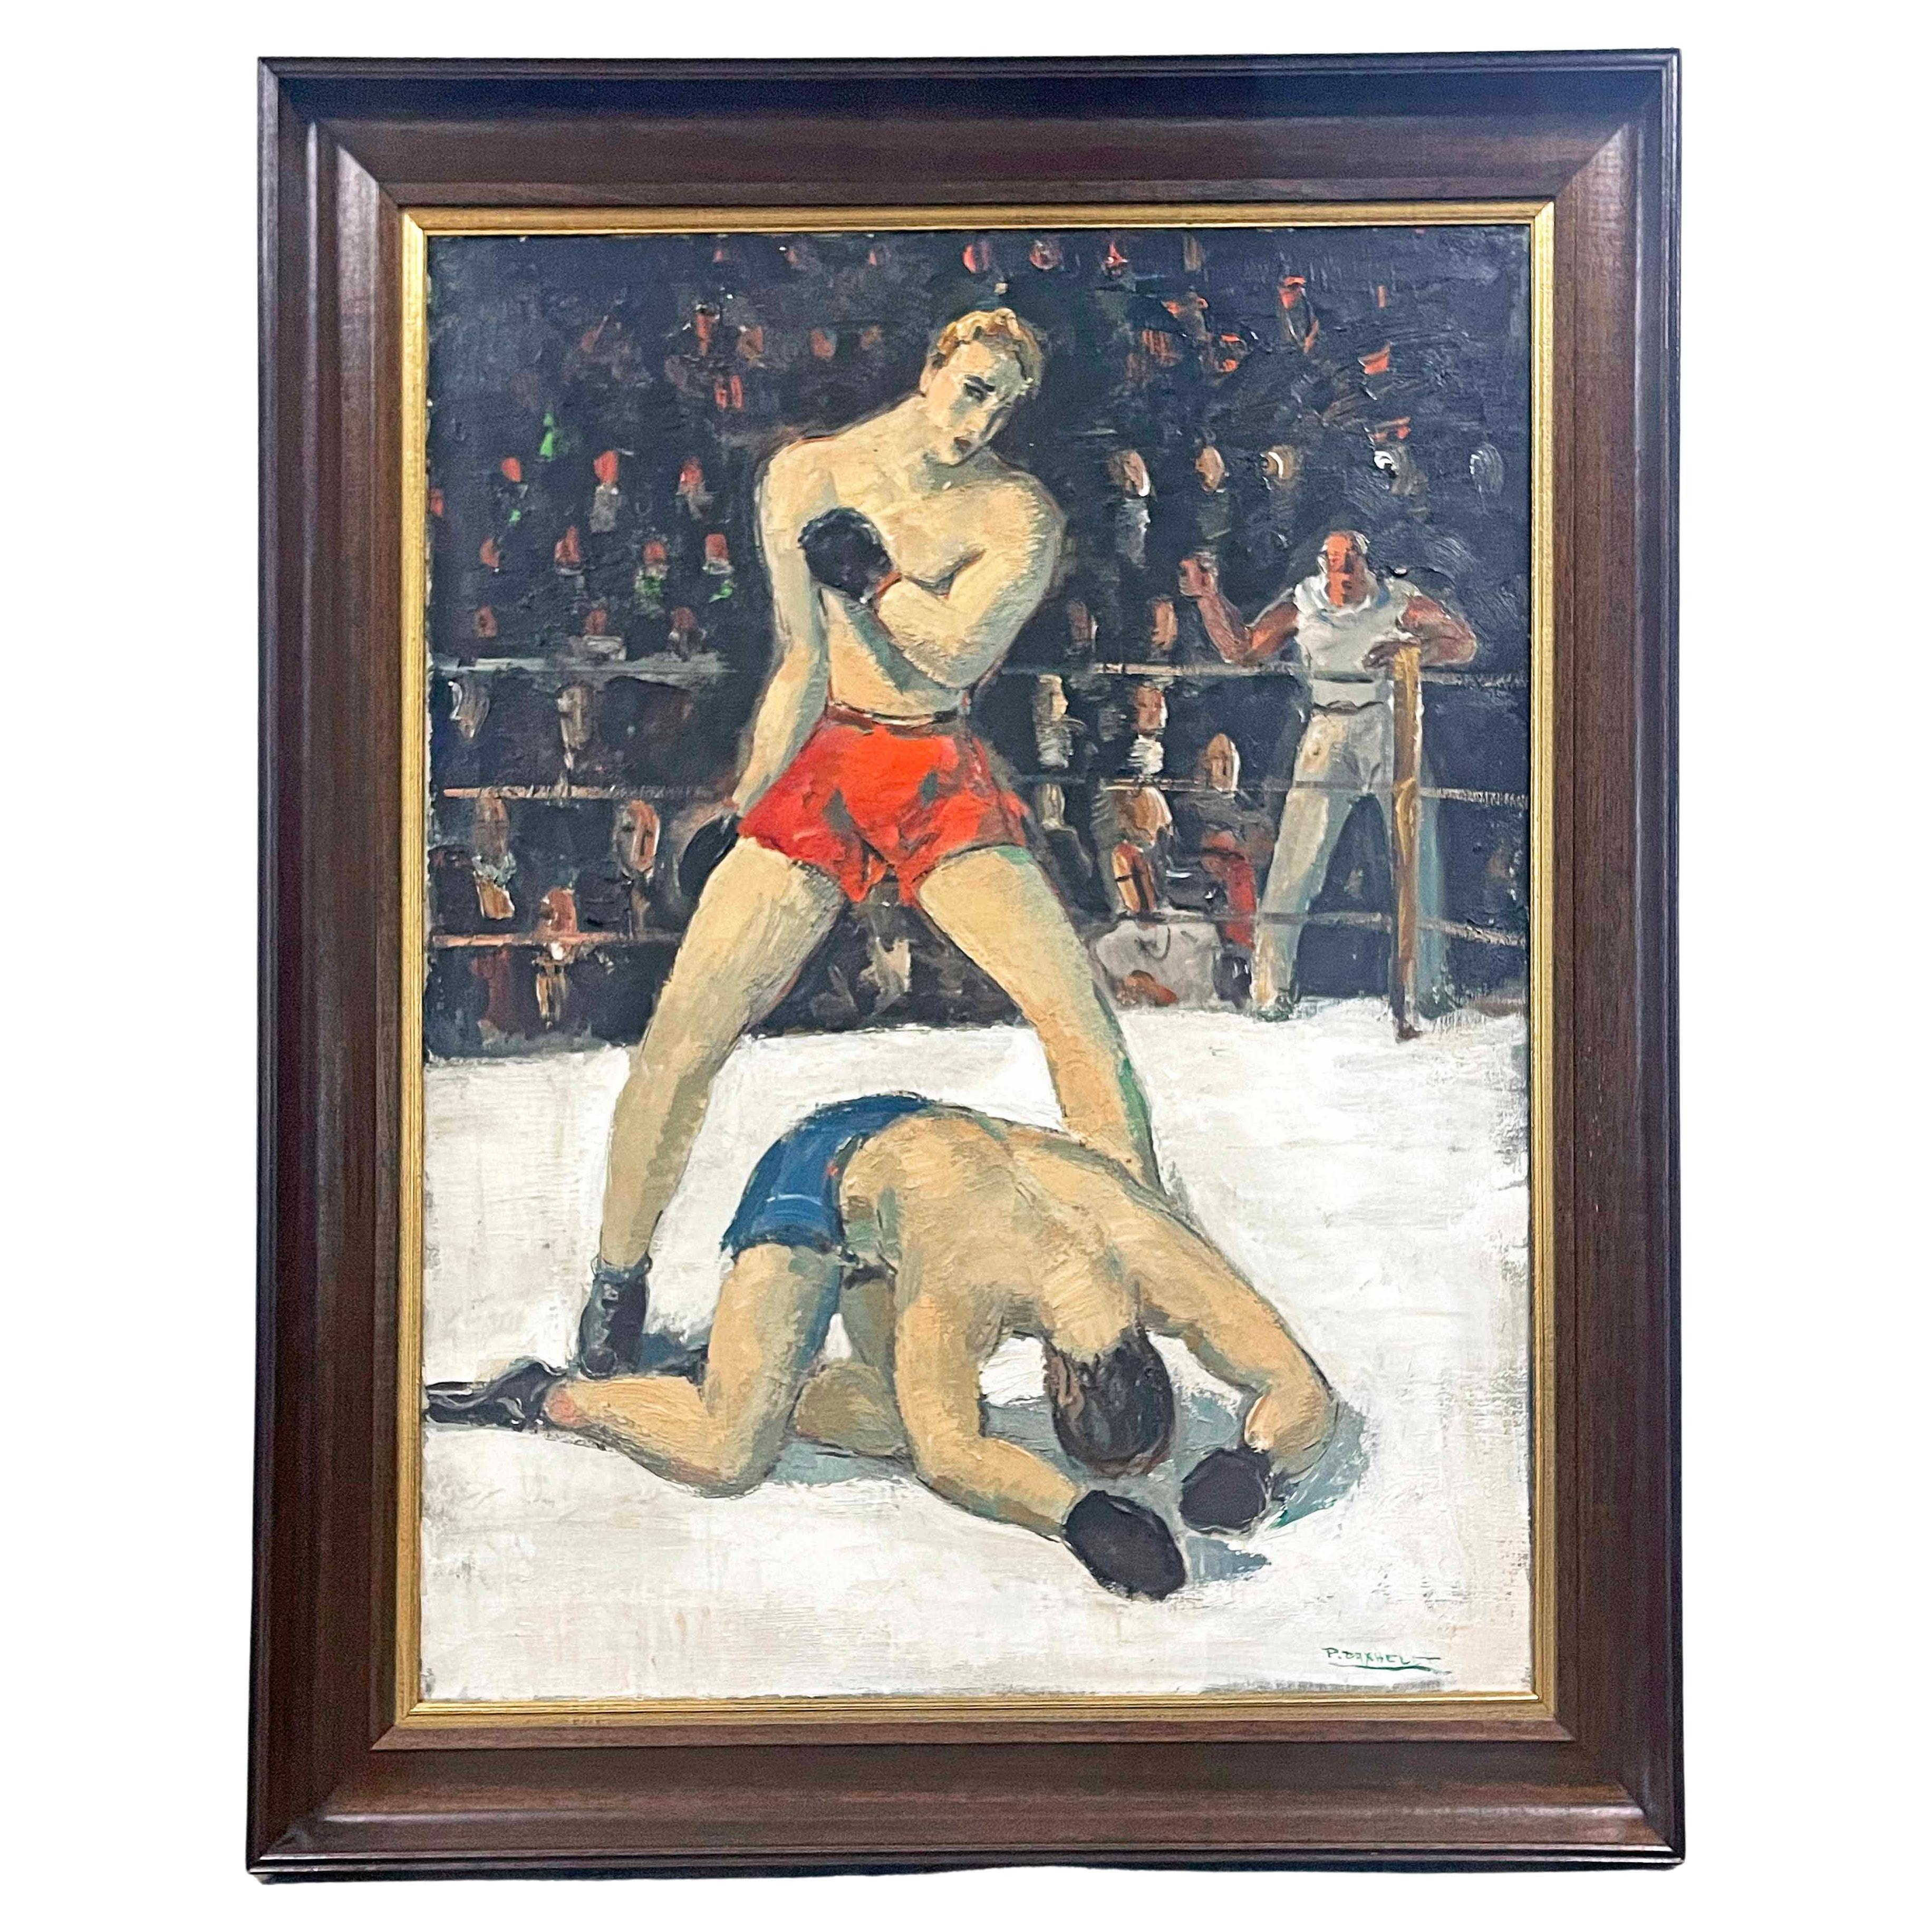 "Knockout, " Dramatic Art Deco Painting of Boxers, Possibly 1936 Olympics